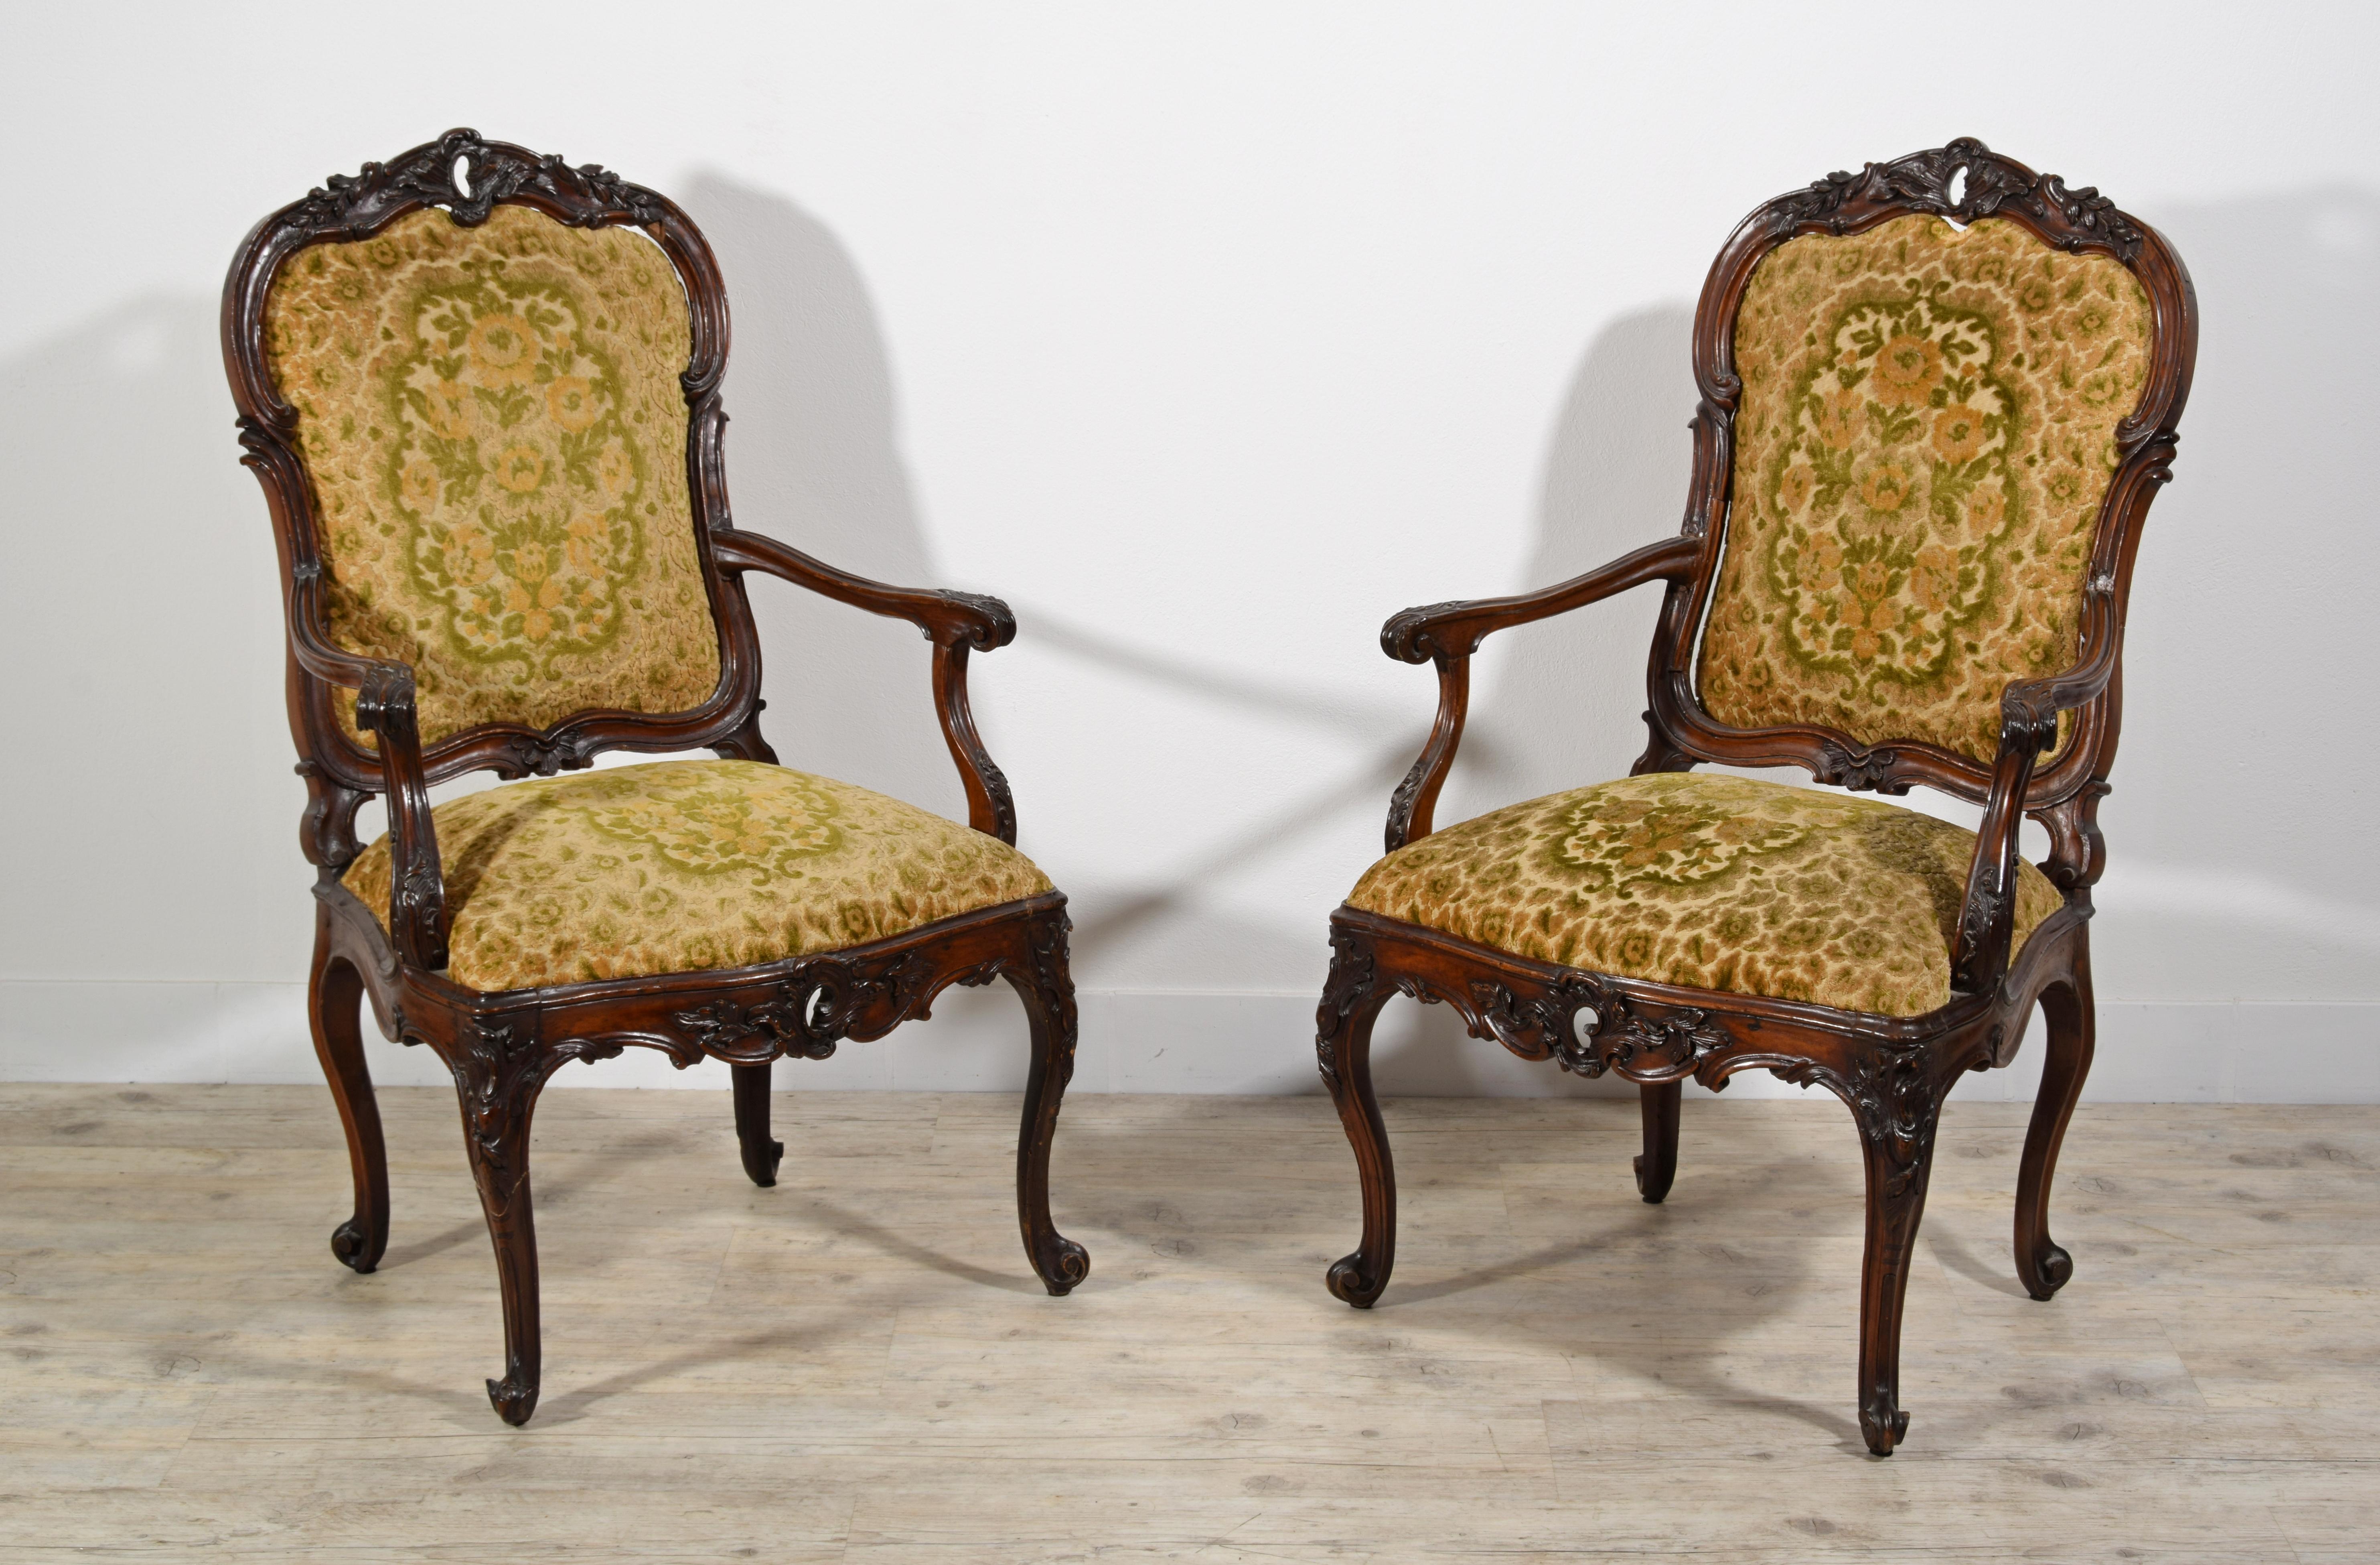 Hand-Carved 18th Century, Pair of Italian Wood Armchairs For Sale